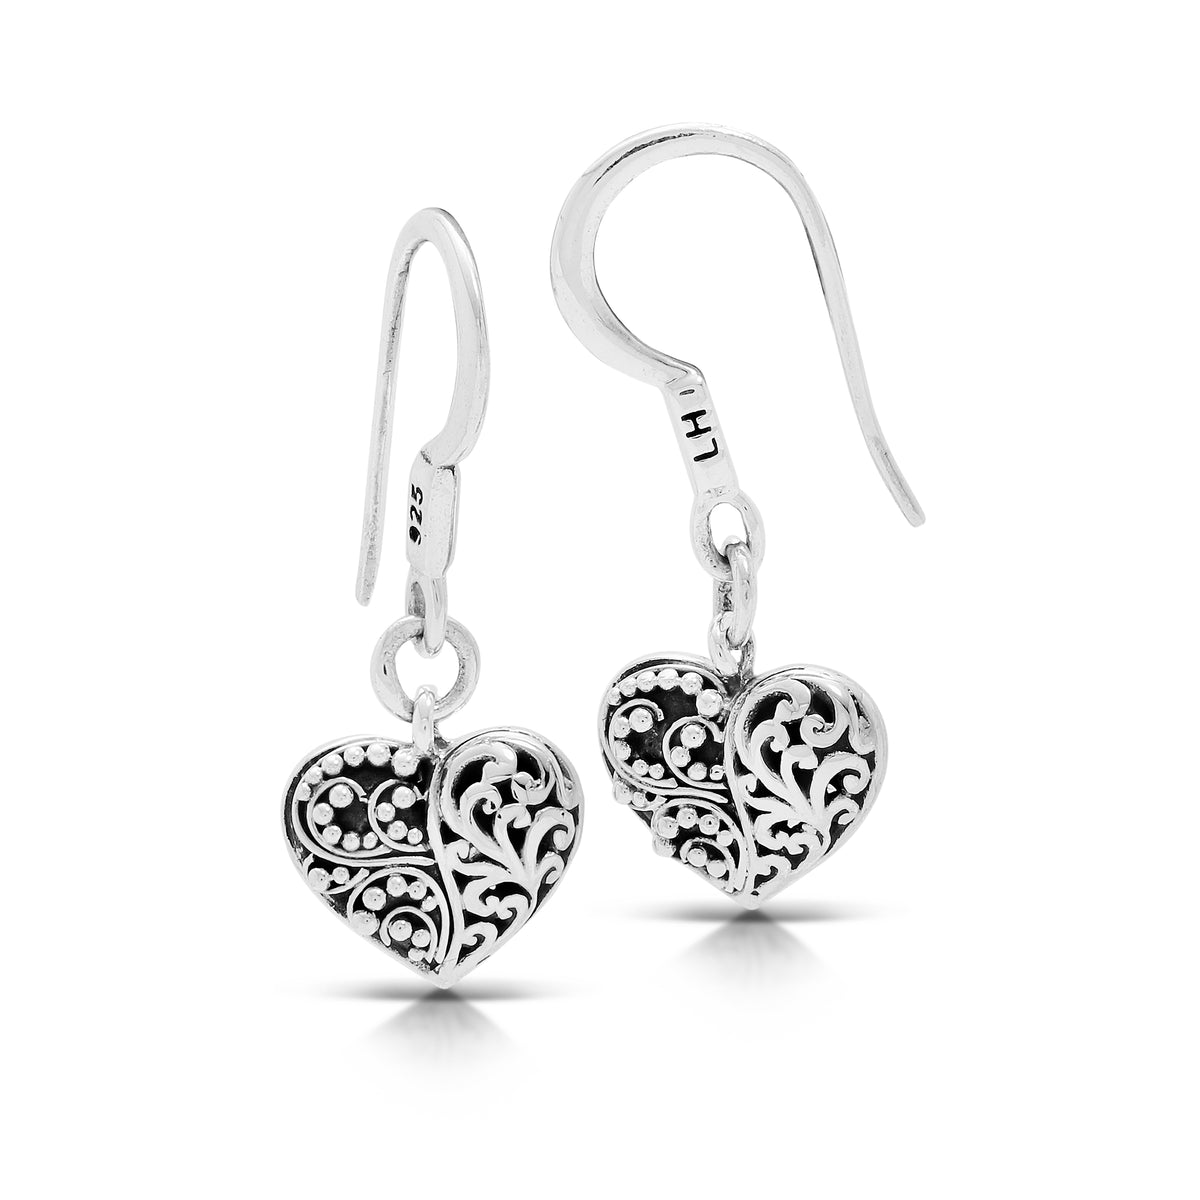 Classic Carved Scroll & Granulated Heart-Shaped Half Fish Hook Earrings. 11mm x 10mm Charm